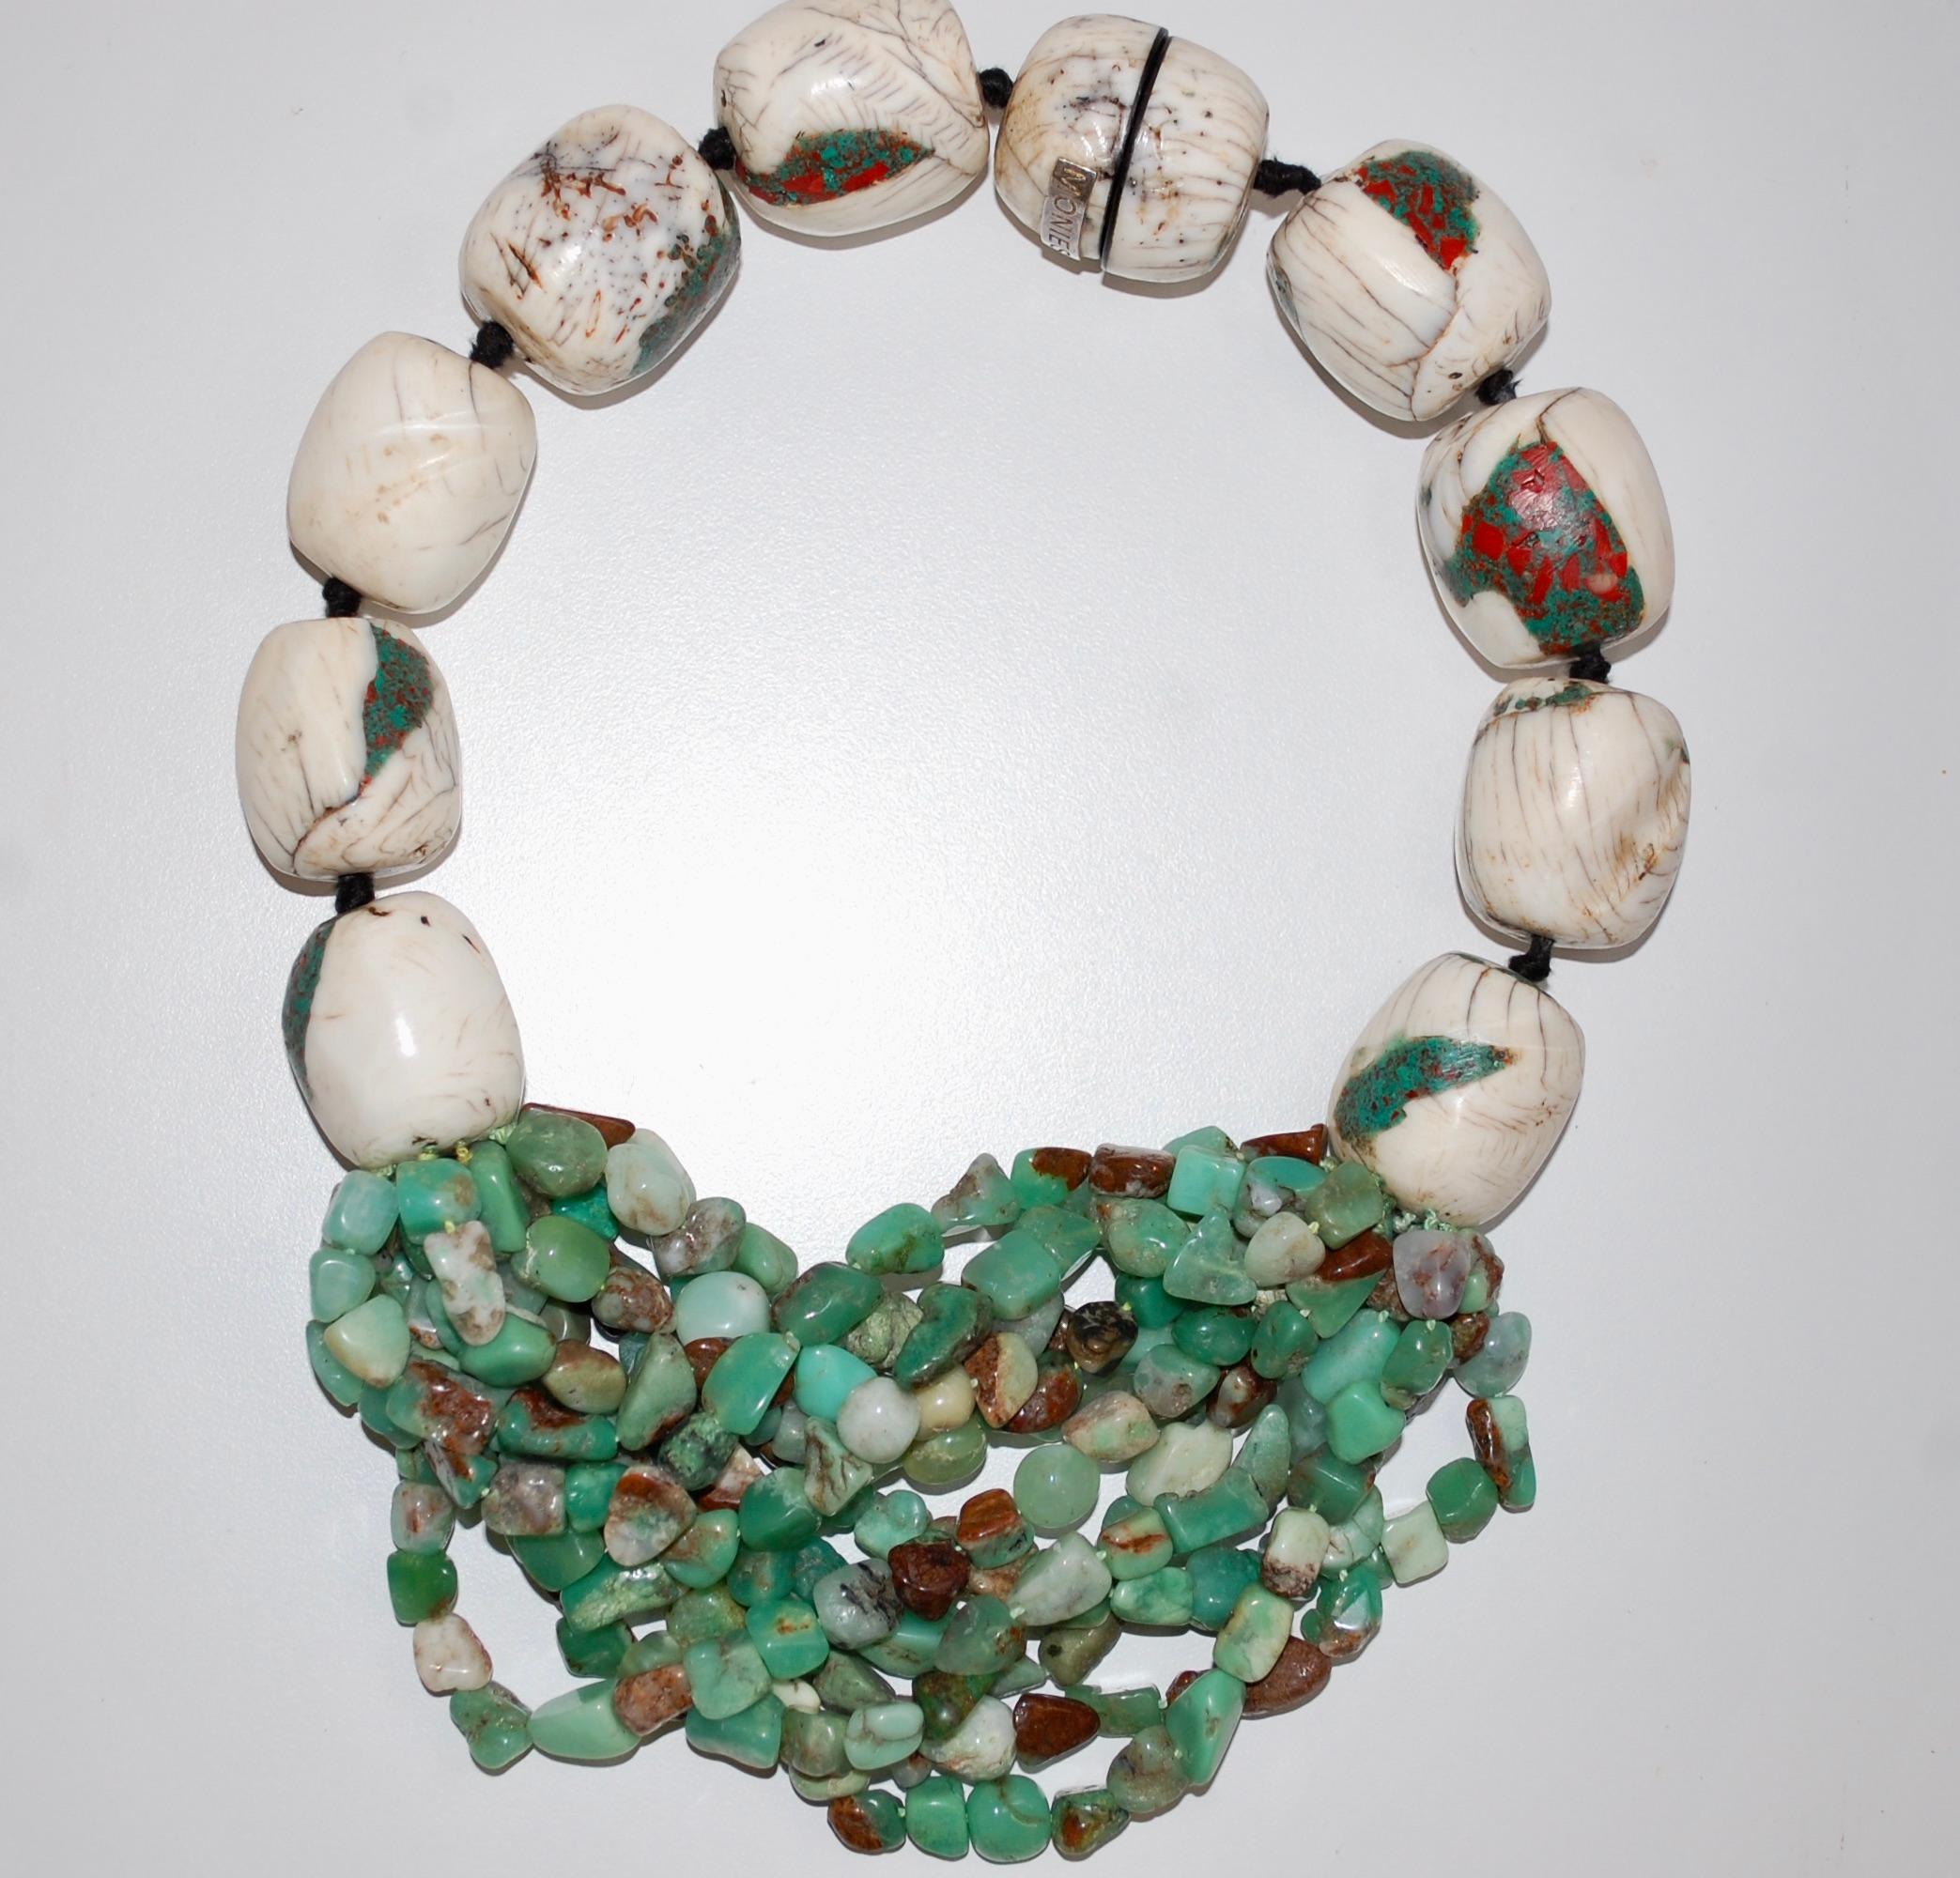  Monies Statement Necklace White Turquoise and Chrysoprase  For Sale 2